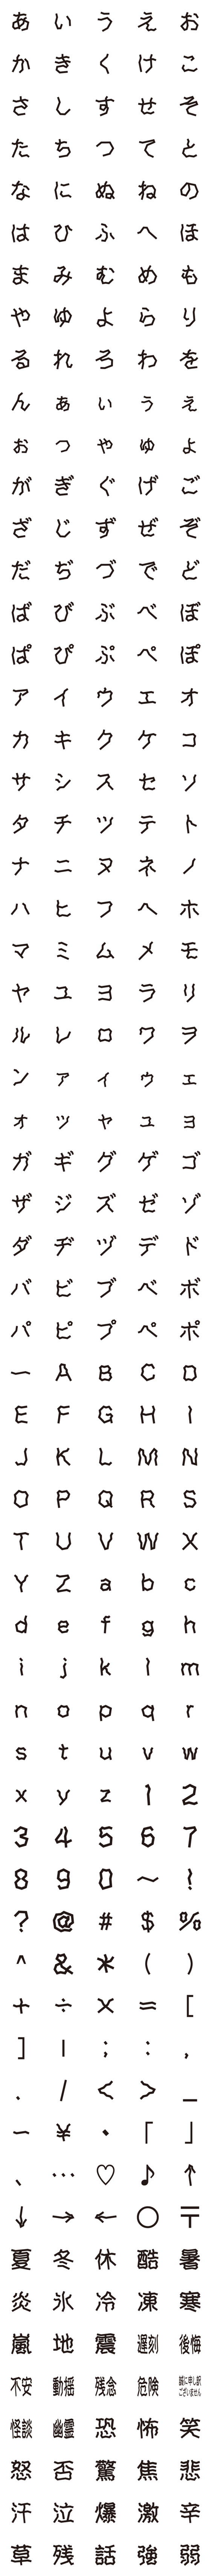 [LINE絵文字]DFホラーA フォント絵文字の画像一覧